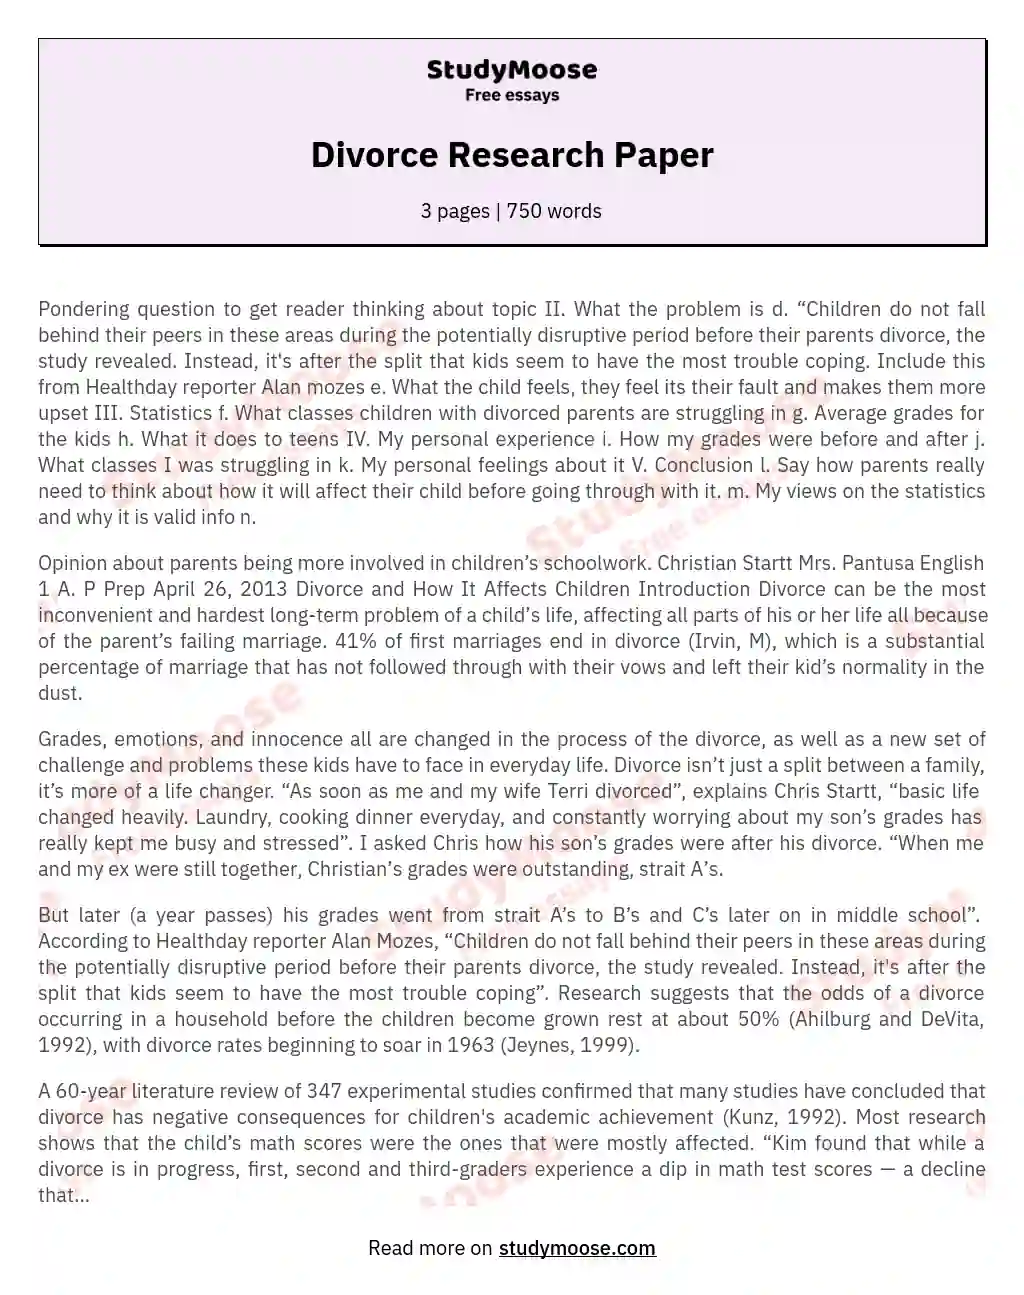 example of research title about divorce